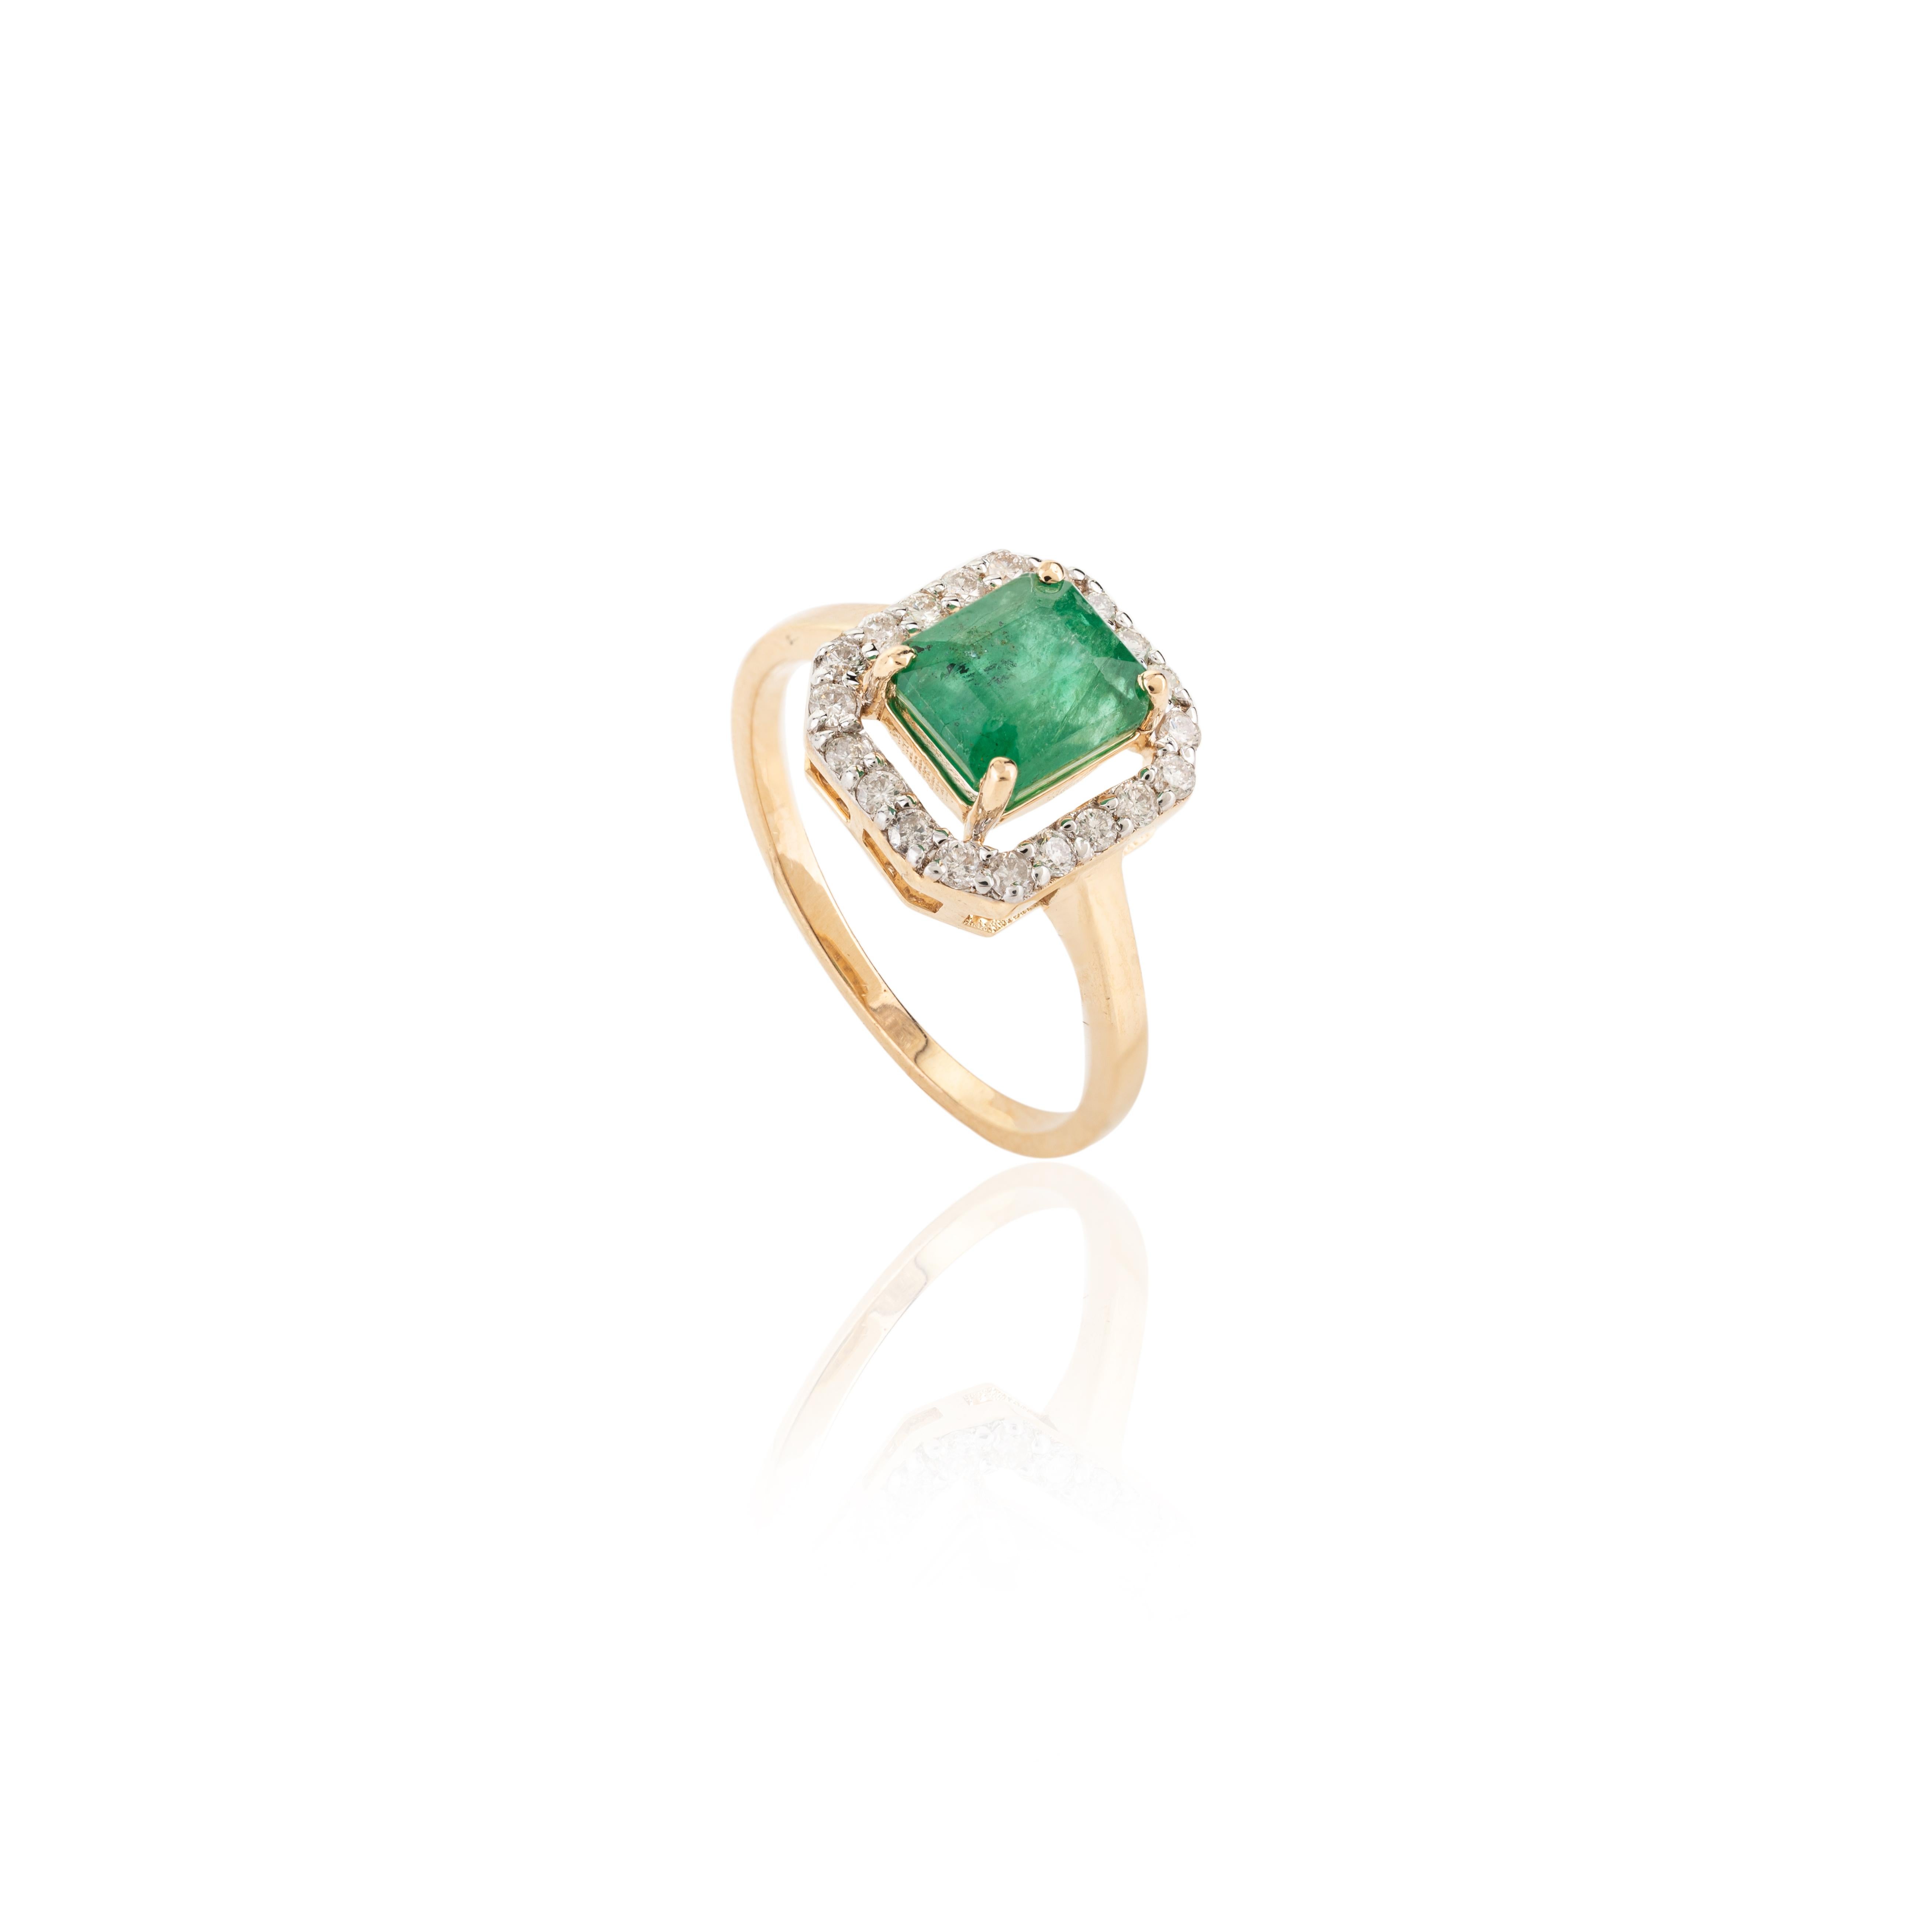 For Sale:  1.5 Carat Octagon Emerald Halo Diamond Wedding Ring in 18k Yellow Gold 8